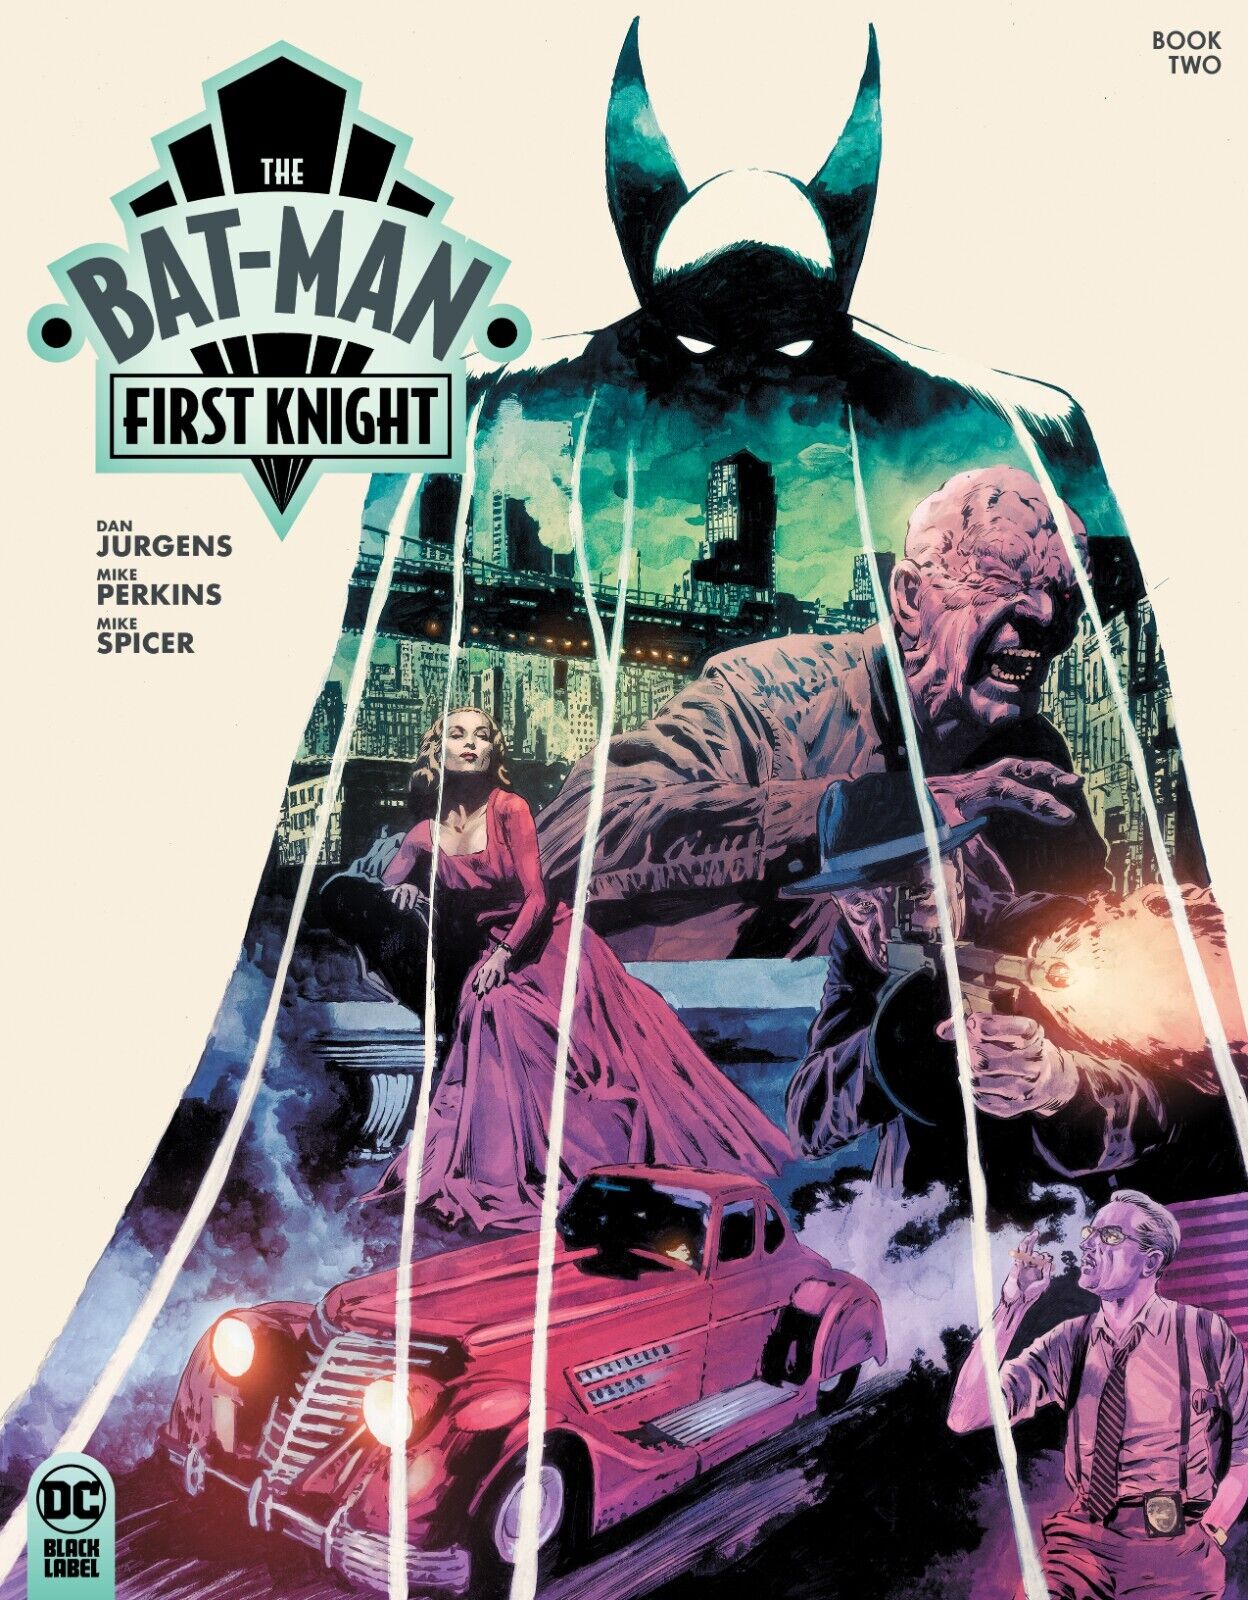 The Bat-Man First Knight #2 (of 3) (2024) (New) Choice of Covers